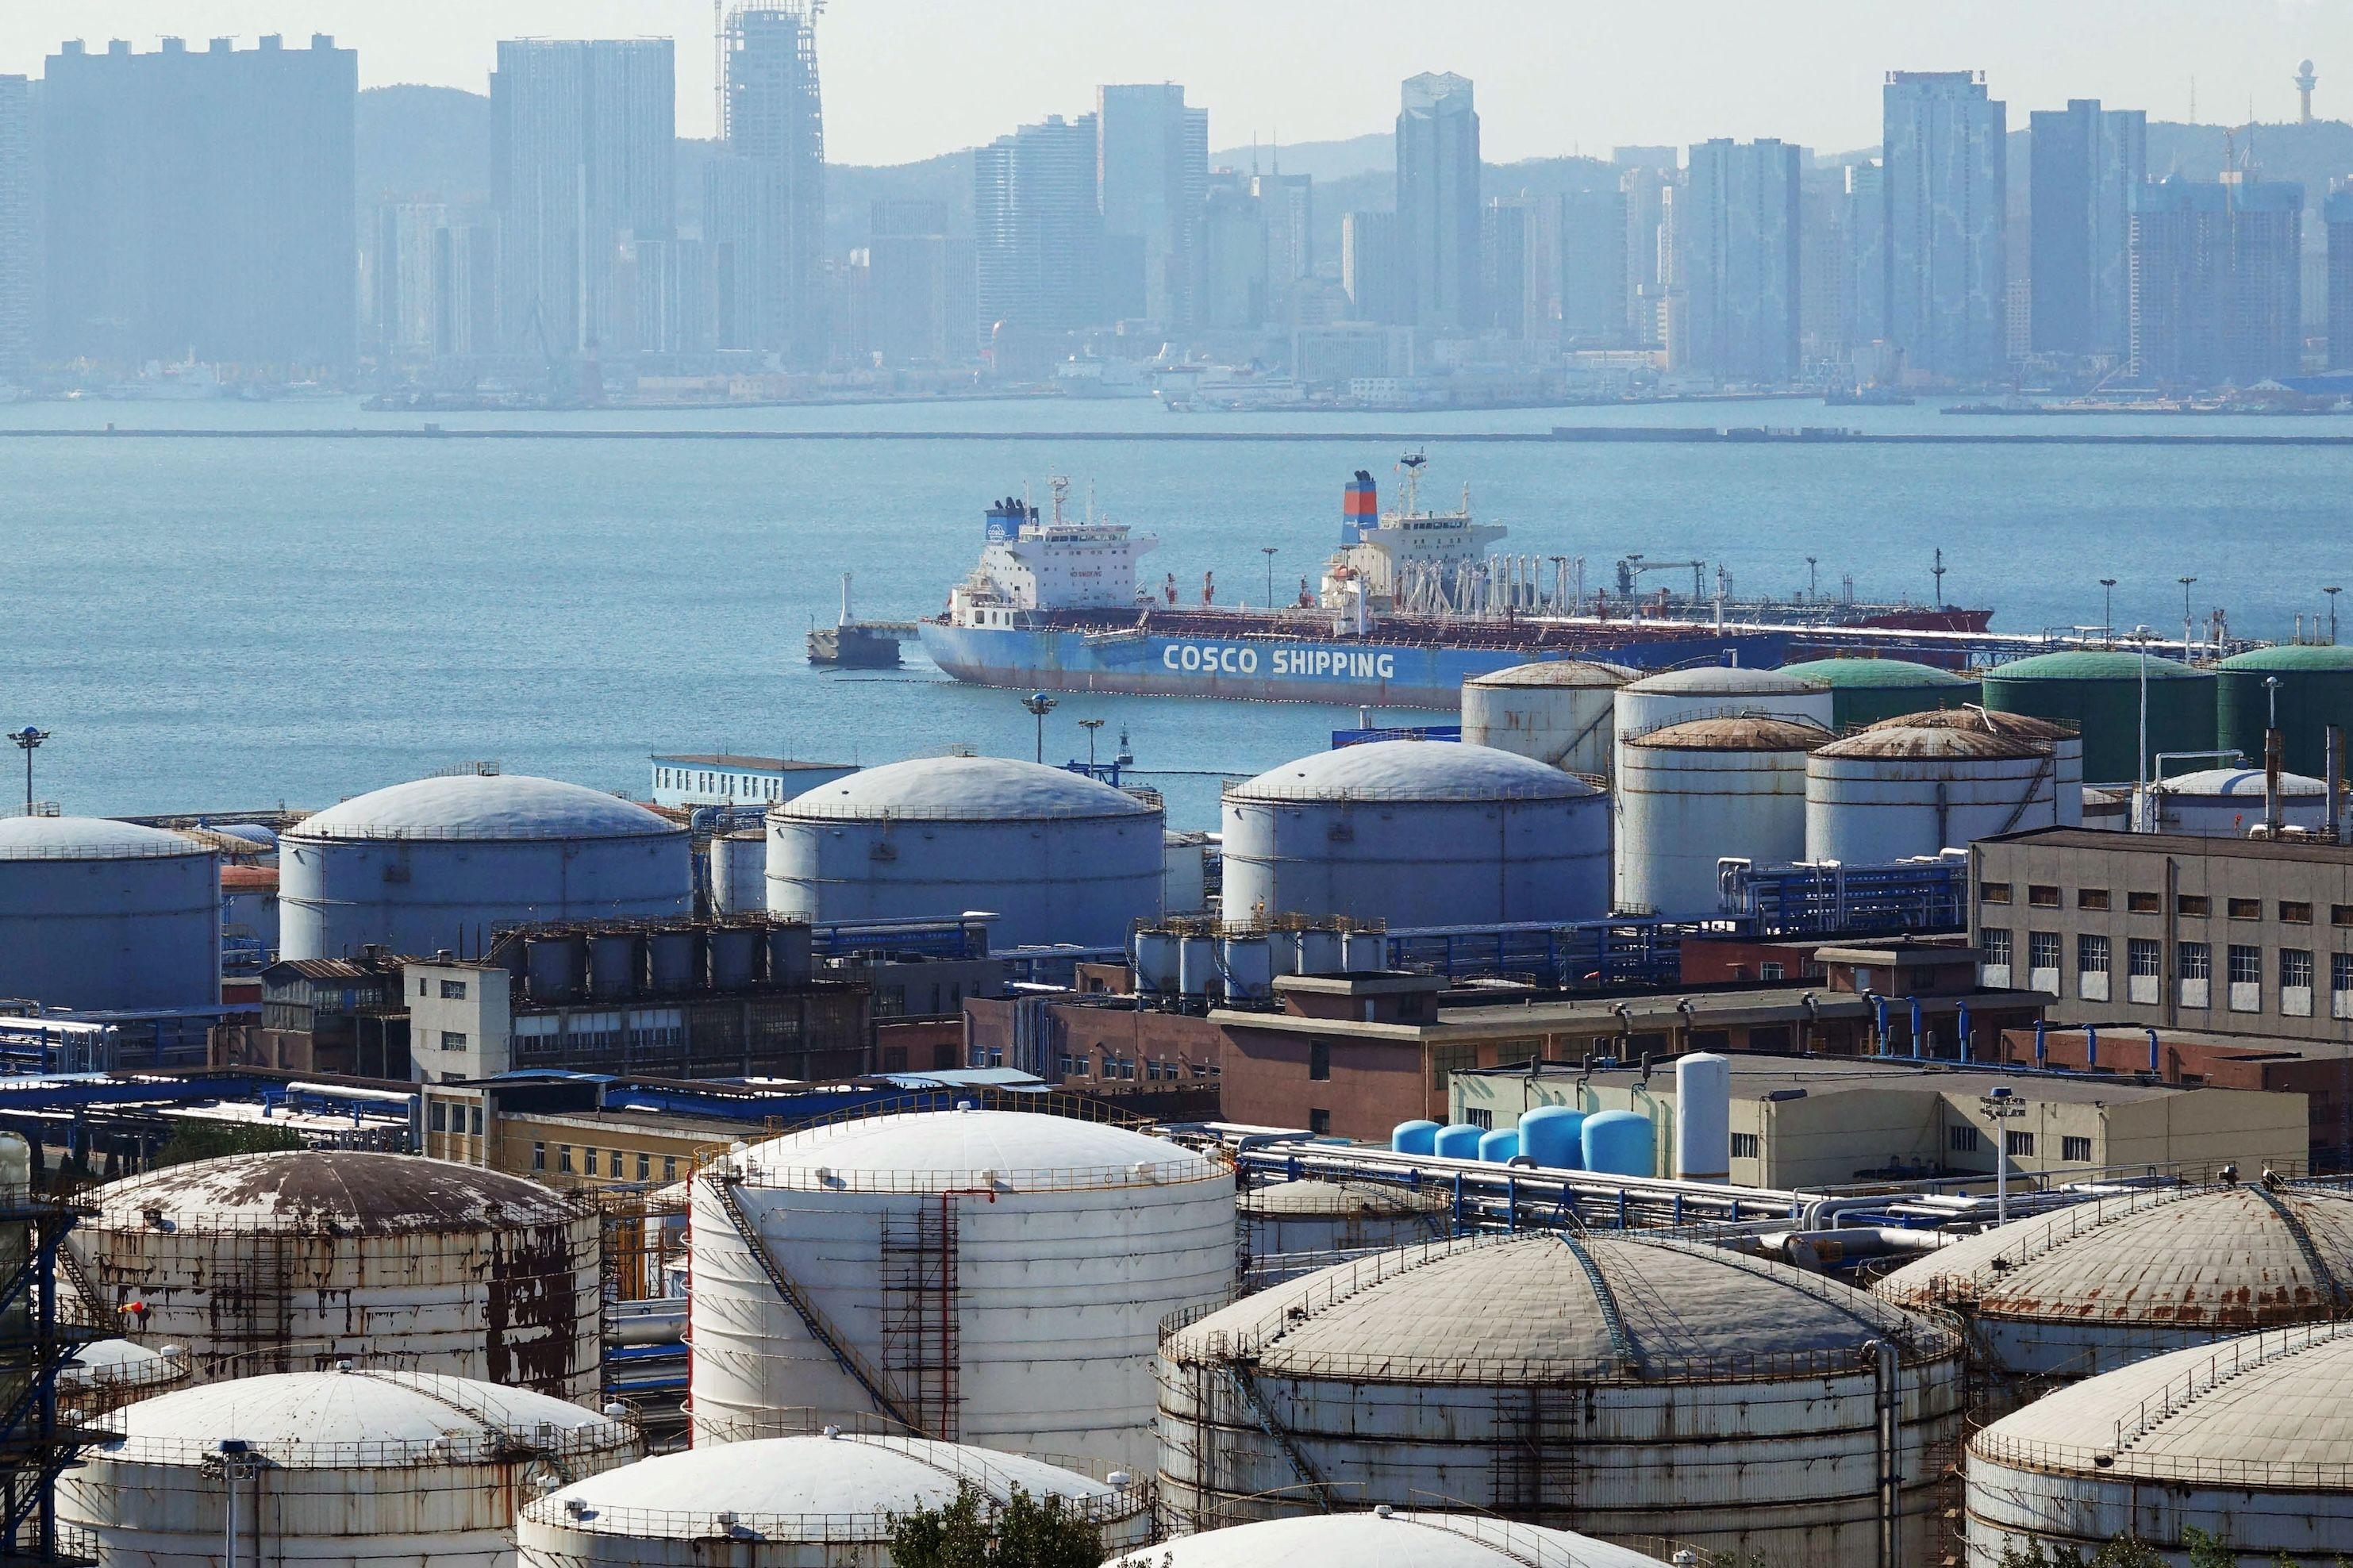 Oil tanks in China's Liaoning province